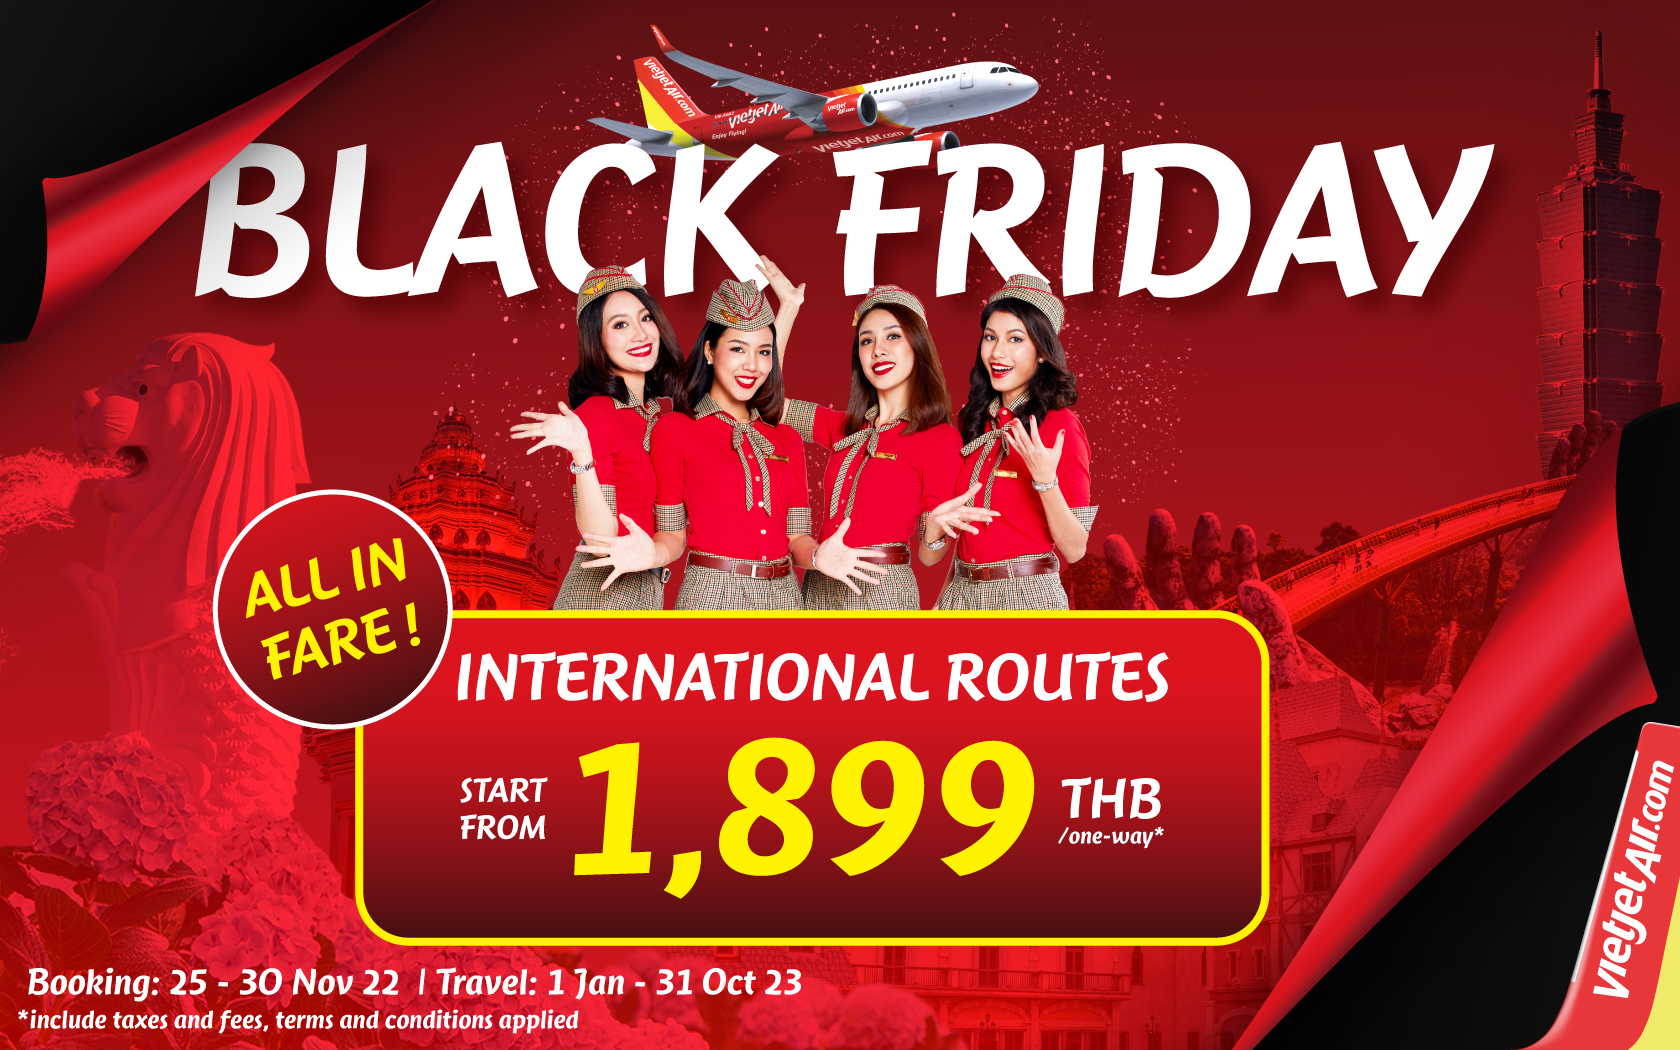 Black Friday Deal! [Buy 3 Get 1 Free] Thai VietJet Air Flight Voucher for  Domestic Route - Klook United States